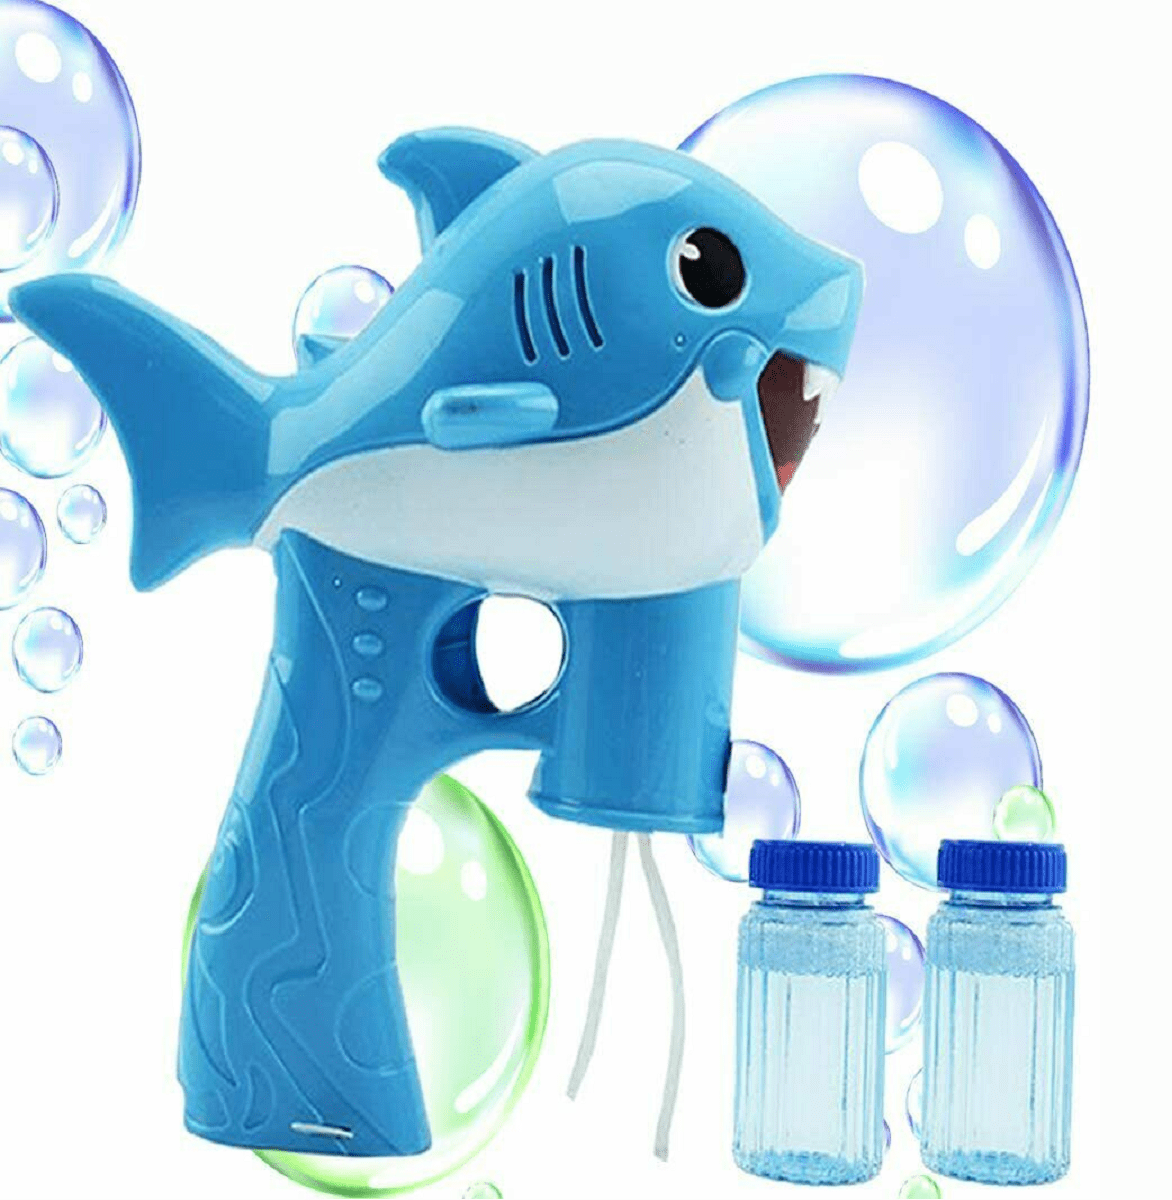 Outdoor Bubble Blaster Toy with Soap Solution New Bubble Gun Blower for Kids 